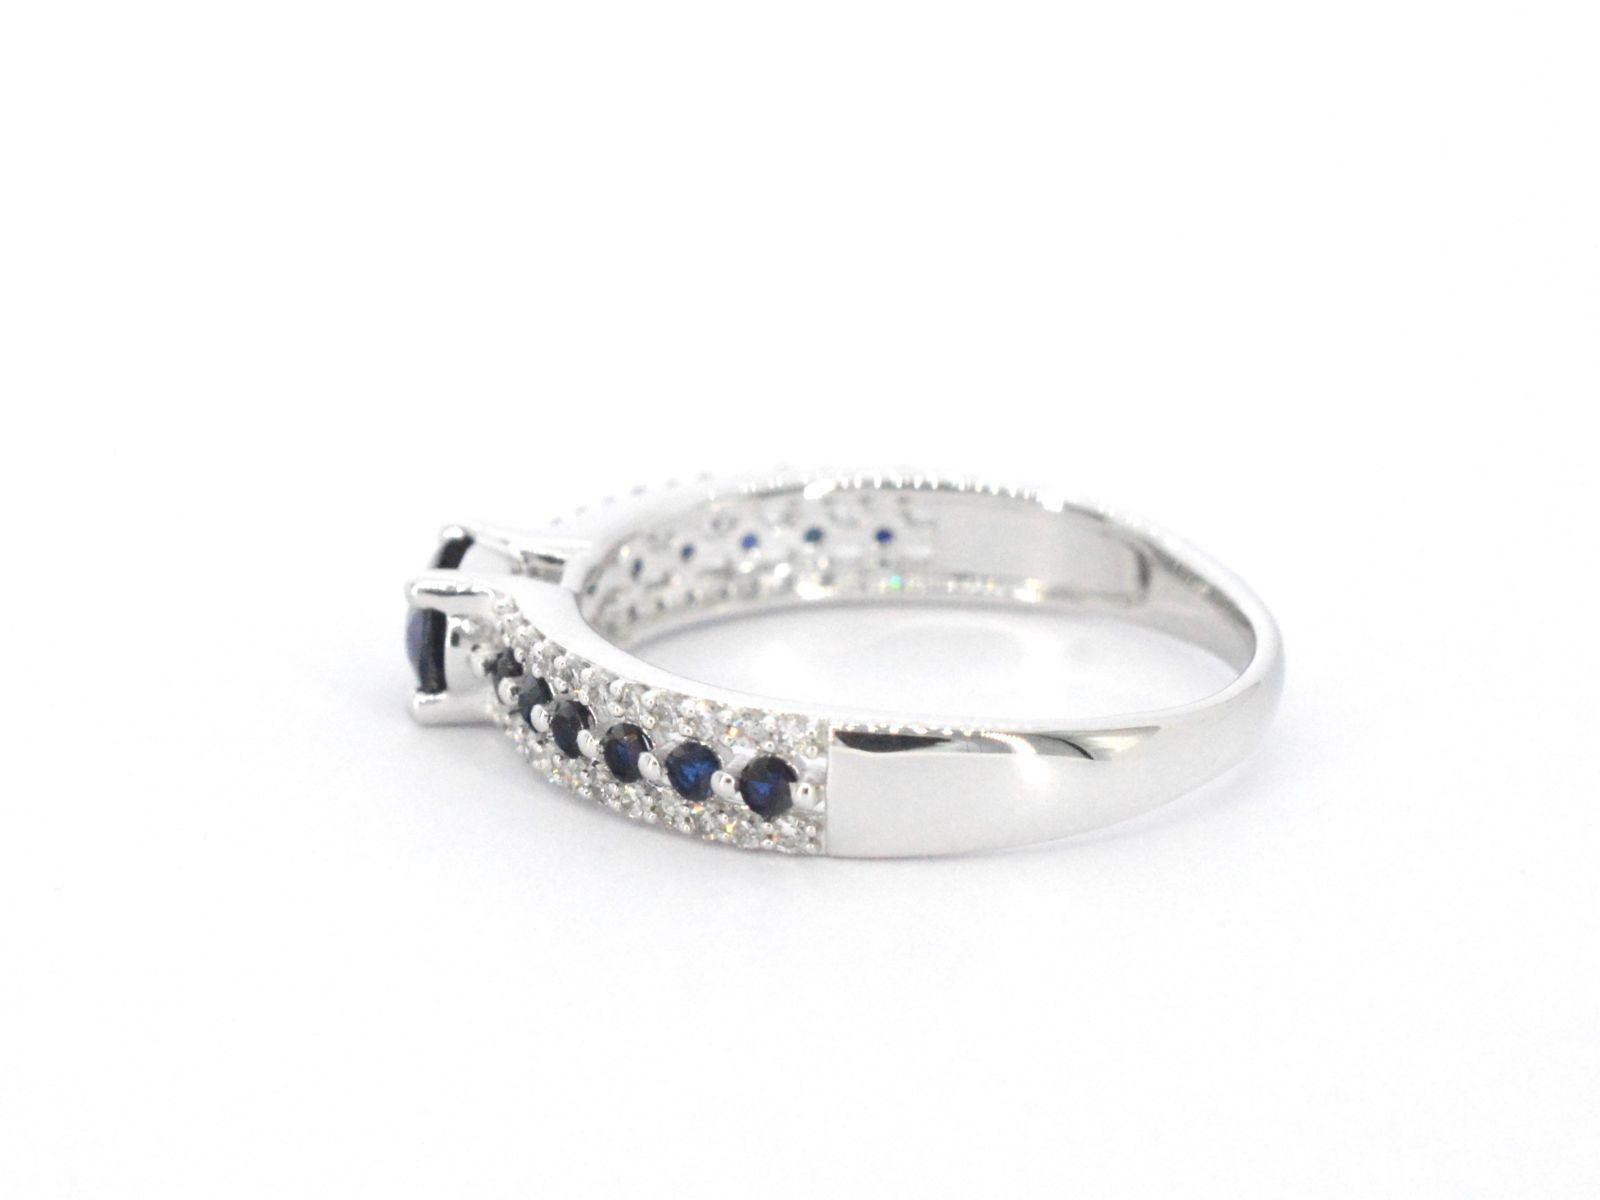 Women's White Gold Ring with Diamonds and Sapphires For Sale